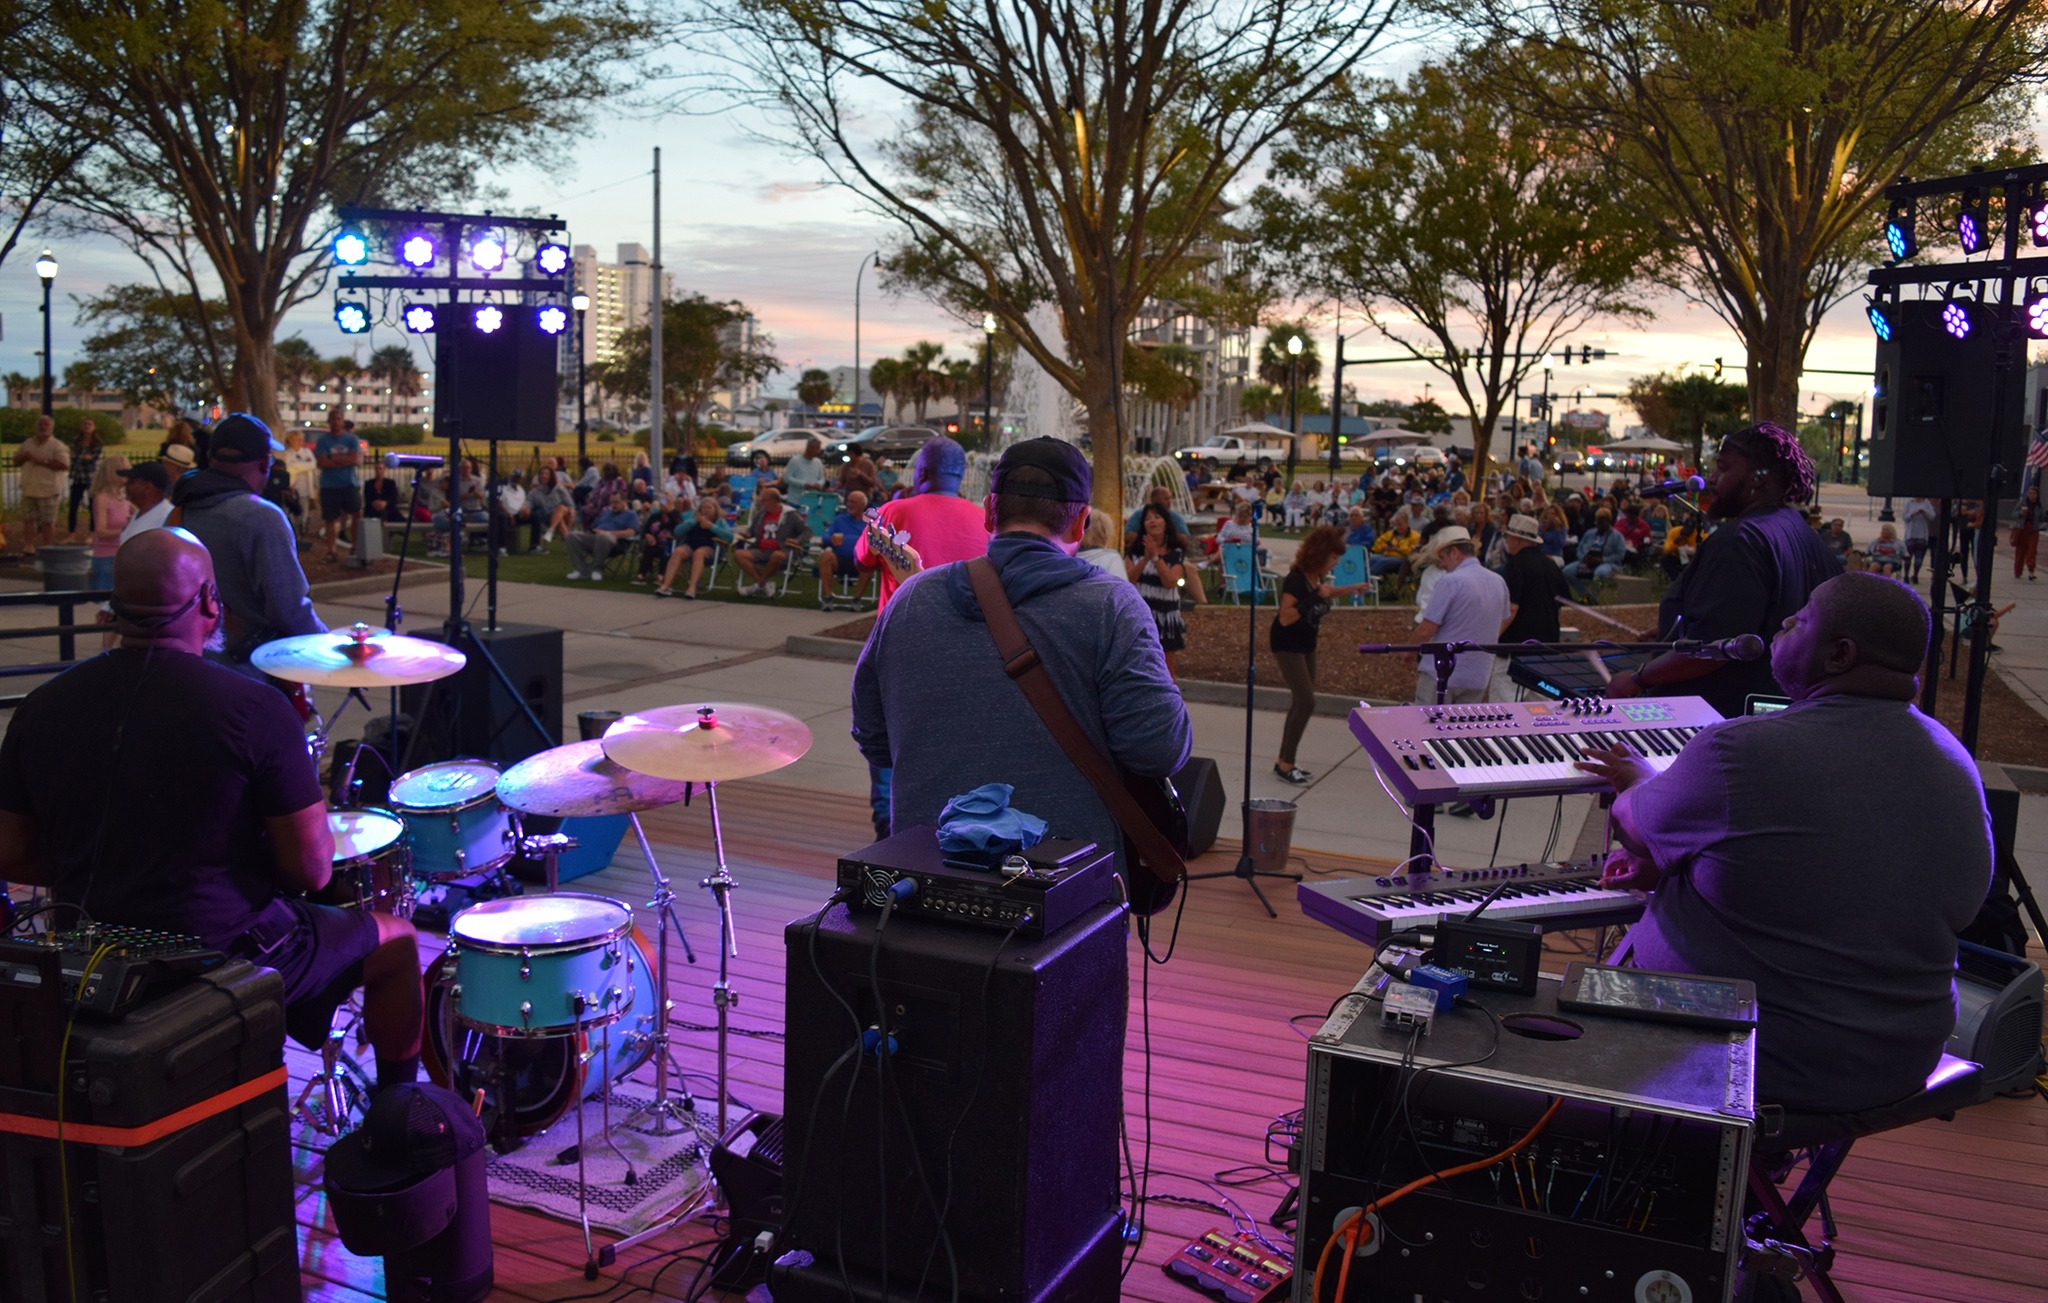 band performs to crowd at nance plaza in myrtle beach